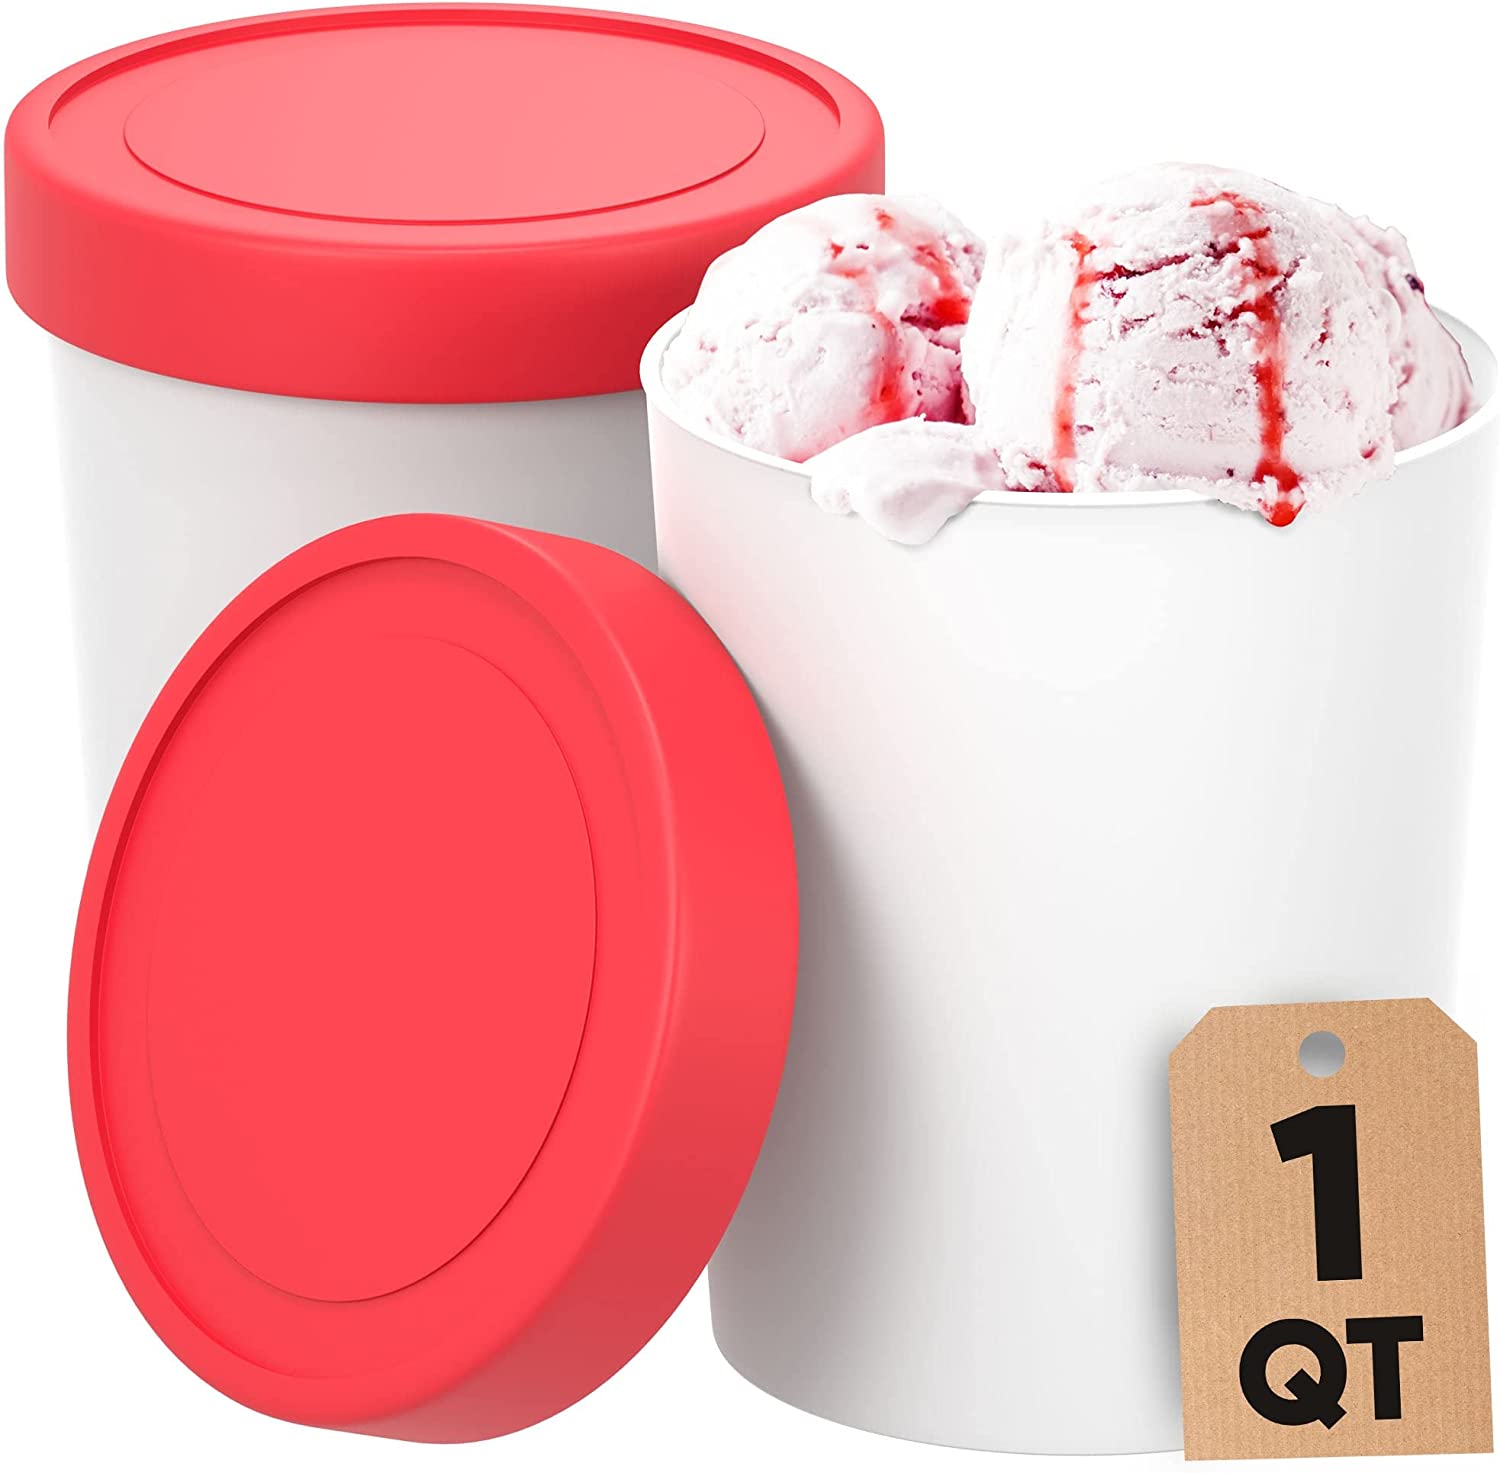 StarPack Home Stackable Easy Clean Ice Cream Containers, 2-Pack